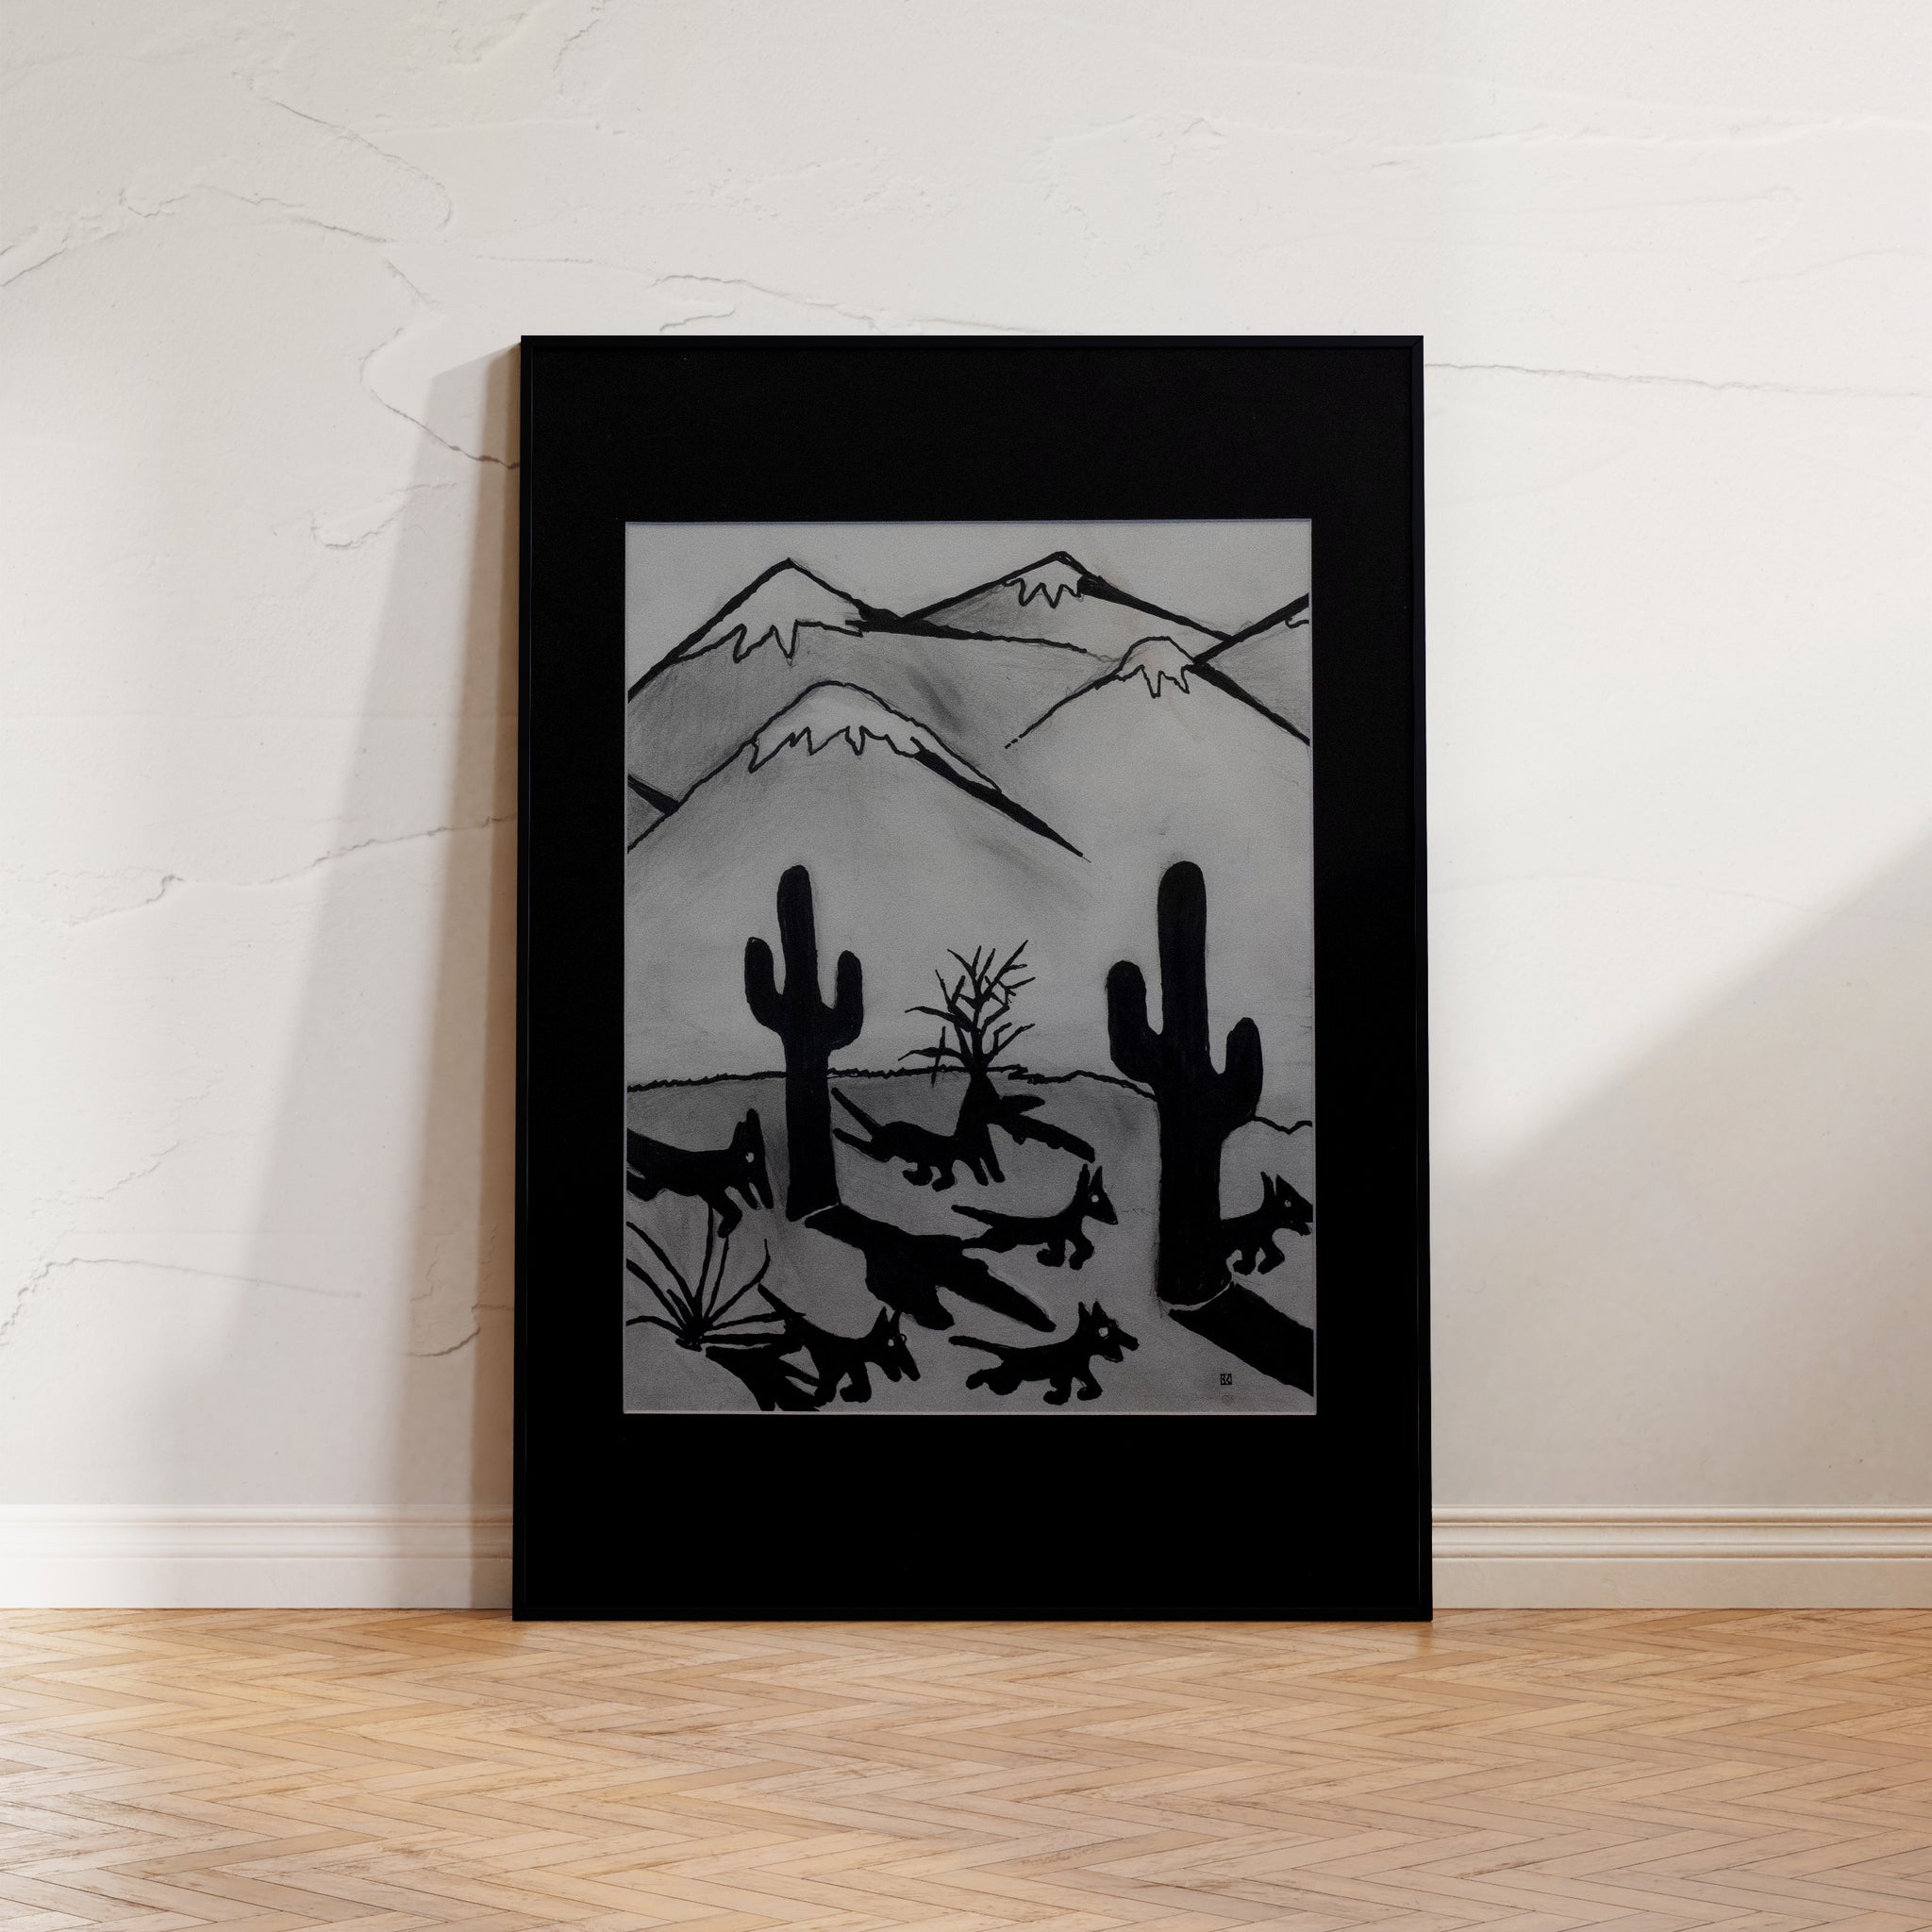 "Twilight Crossing" by Brian Findleton: A monochromatic masterpiece of desertwave aesthetics, featuring coyotes on a nocturnal journey amidst saguaro cacti and sand dunes at dusk.